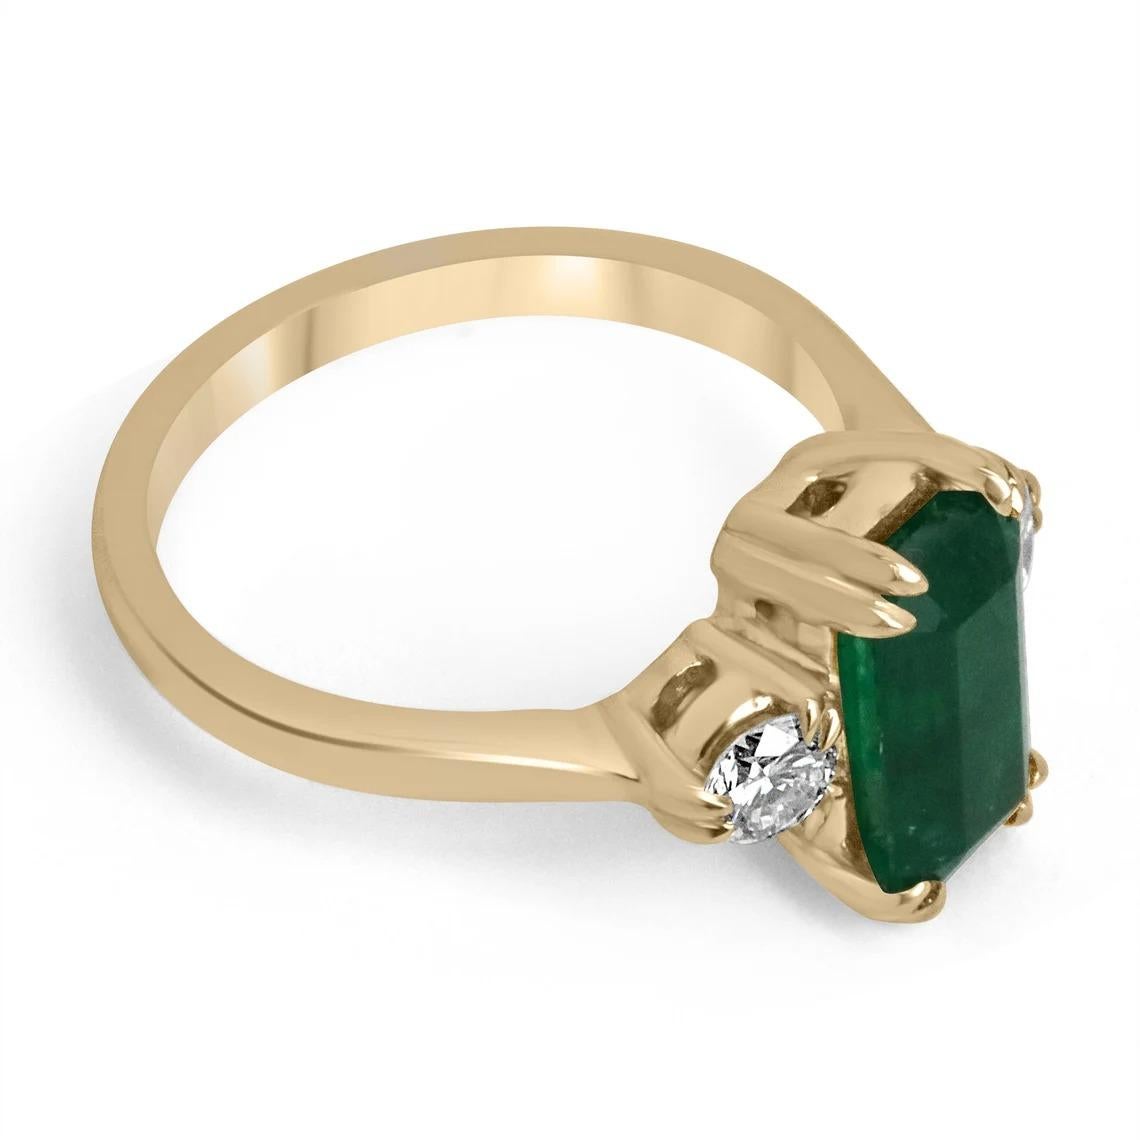 A classic emerald and diamond engagement, statement, or right-hand ring. Dexterously handcrafted in gleaming 18K gold this ring features a rare dark 2.30-carat natural emerald-emerald cut. Set in a secure prong setting, this extraordinary emerald